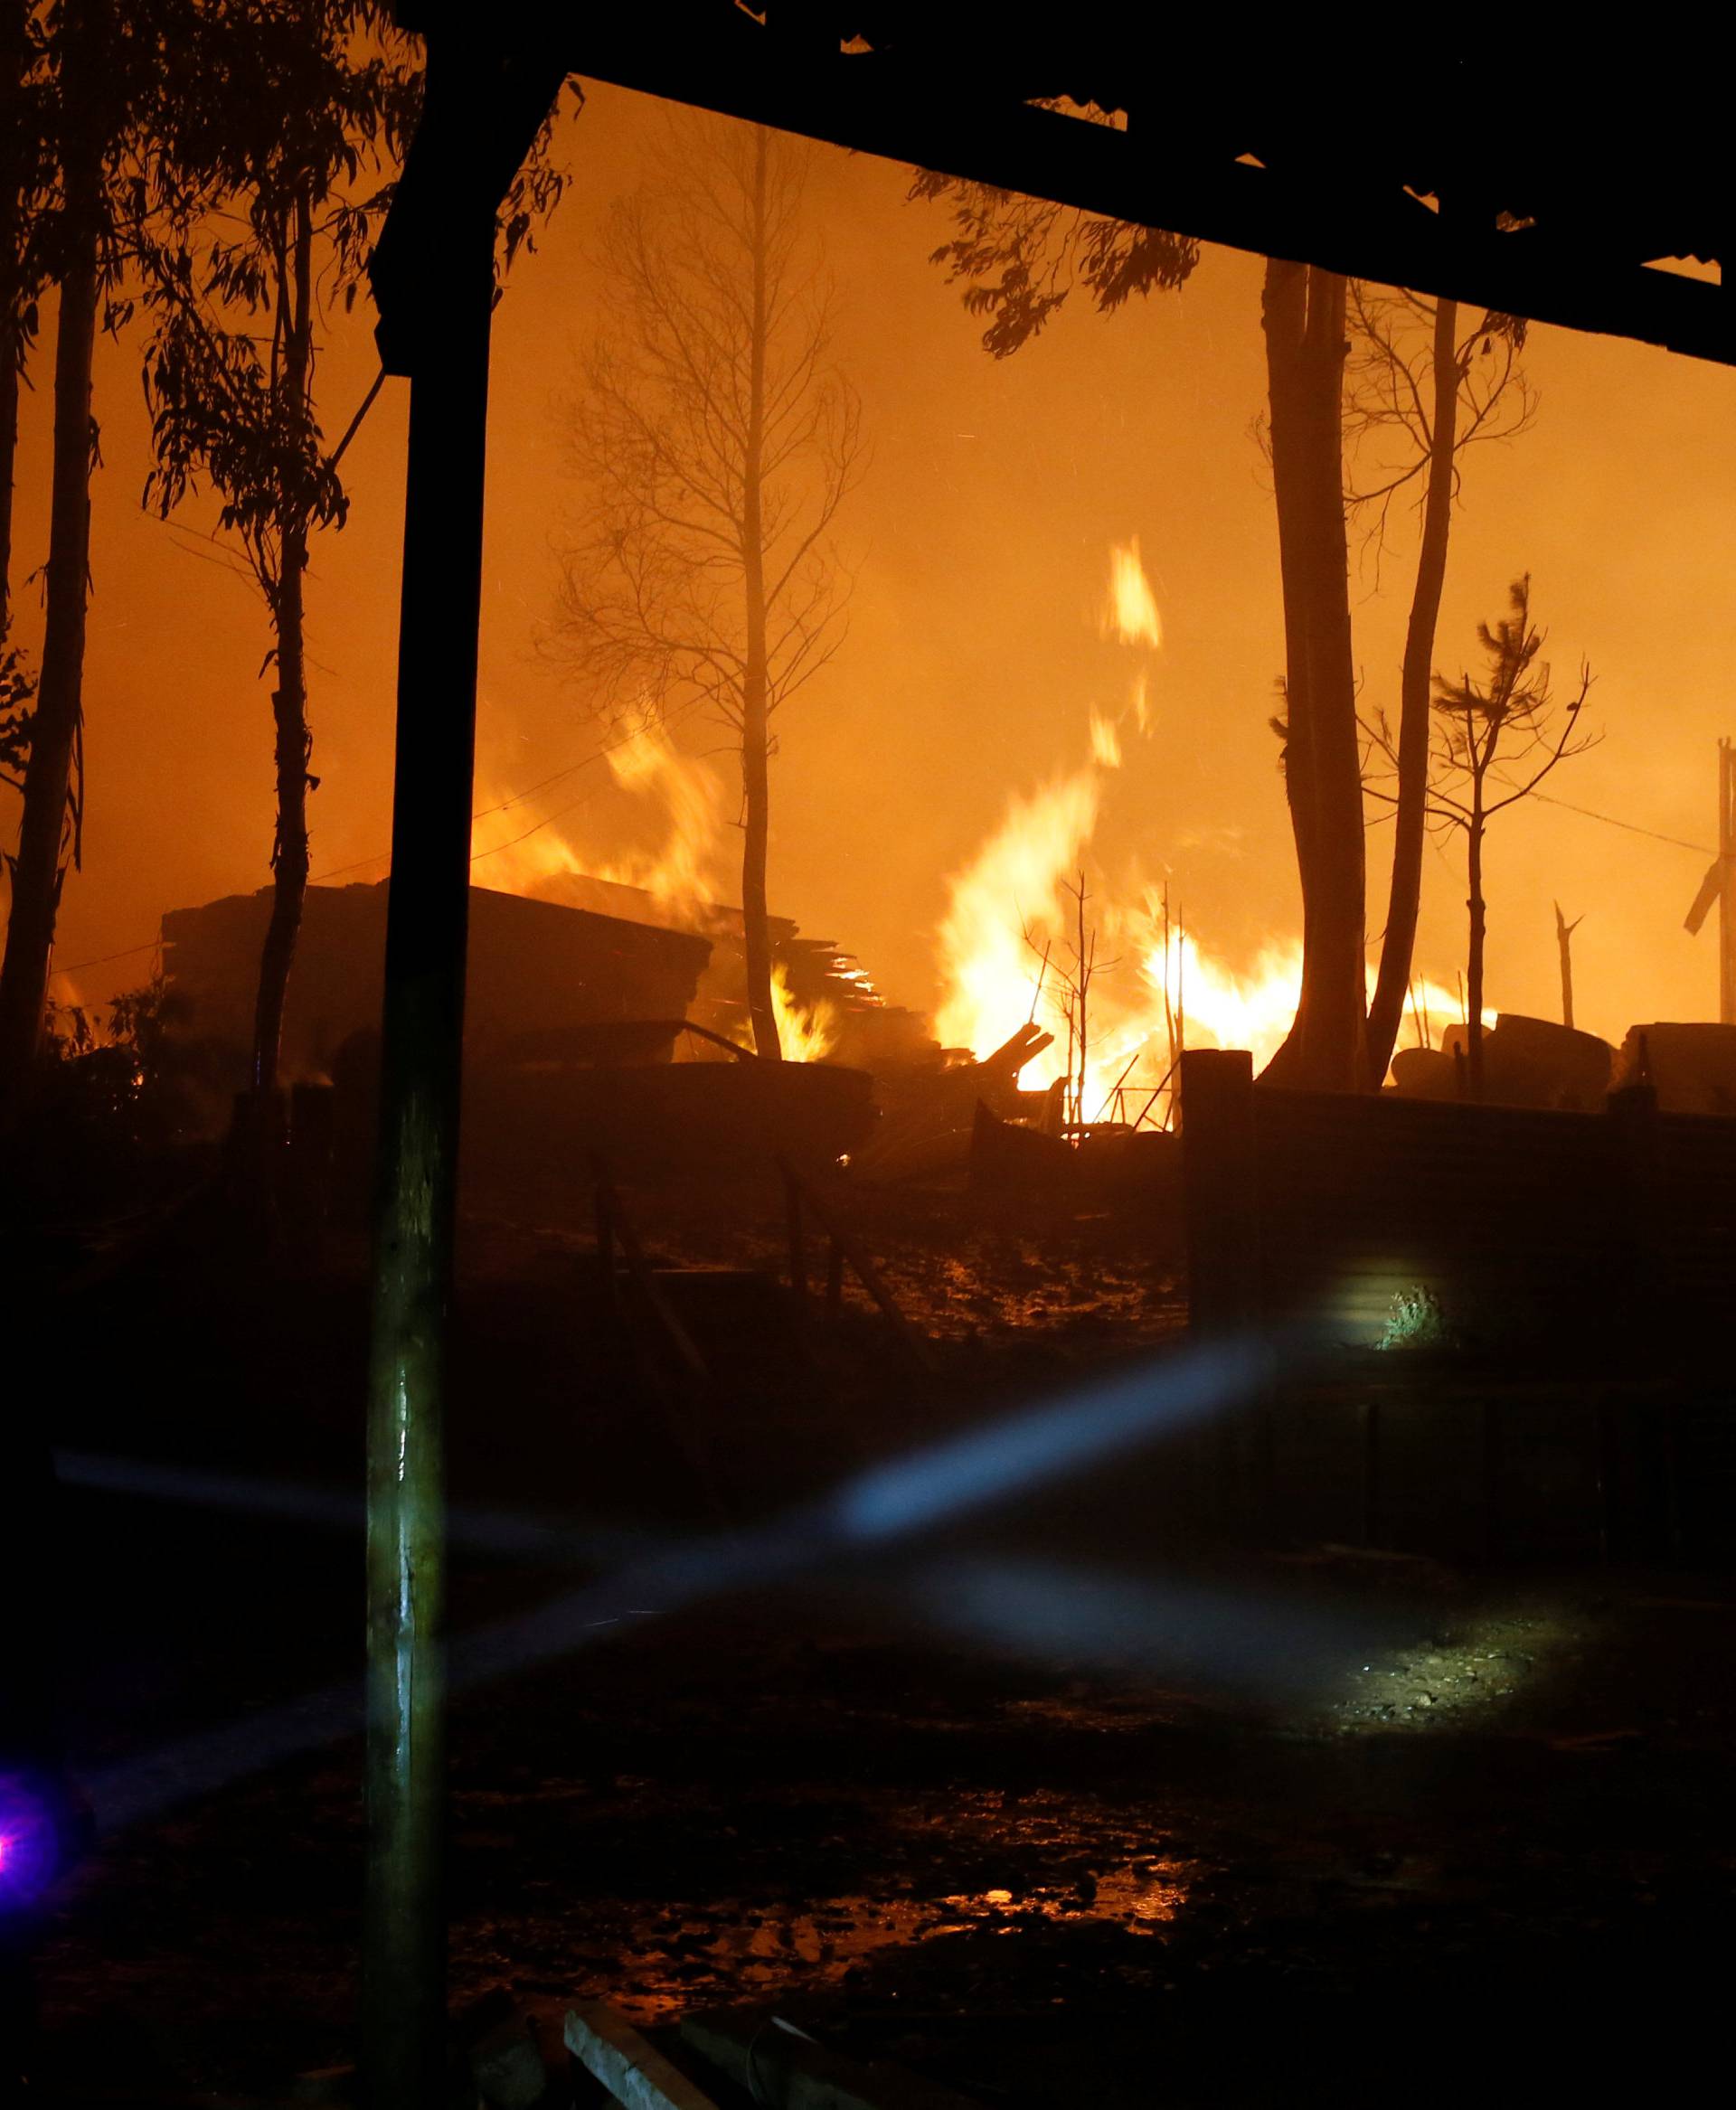 Firefighters try to stop the fire as the worst wildfires in Chile's modern history are ravaging wide swaths of the country's central-south regions, in Santa Olga